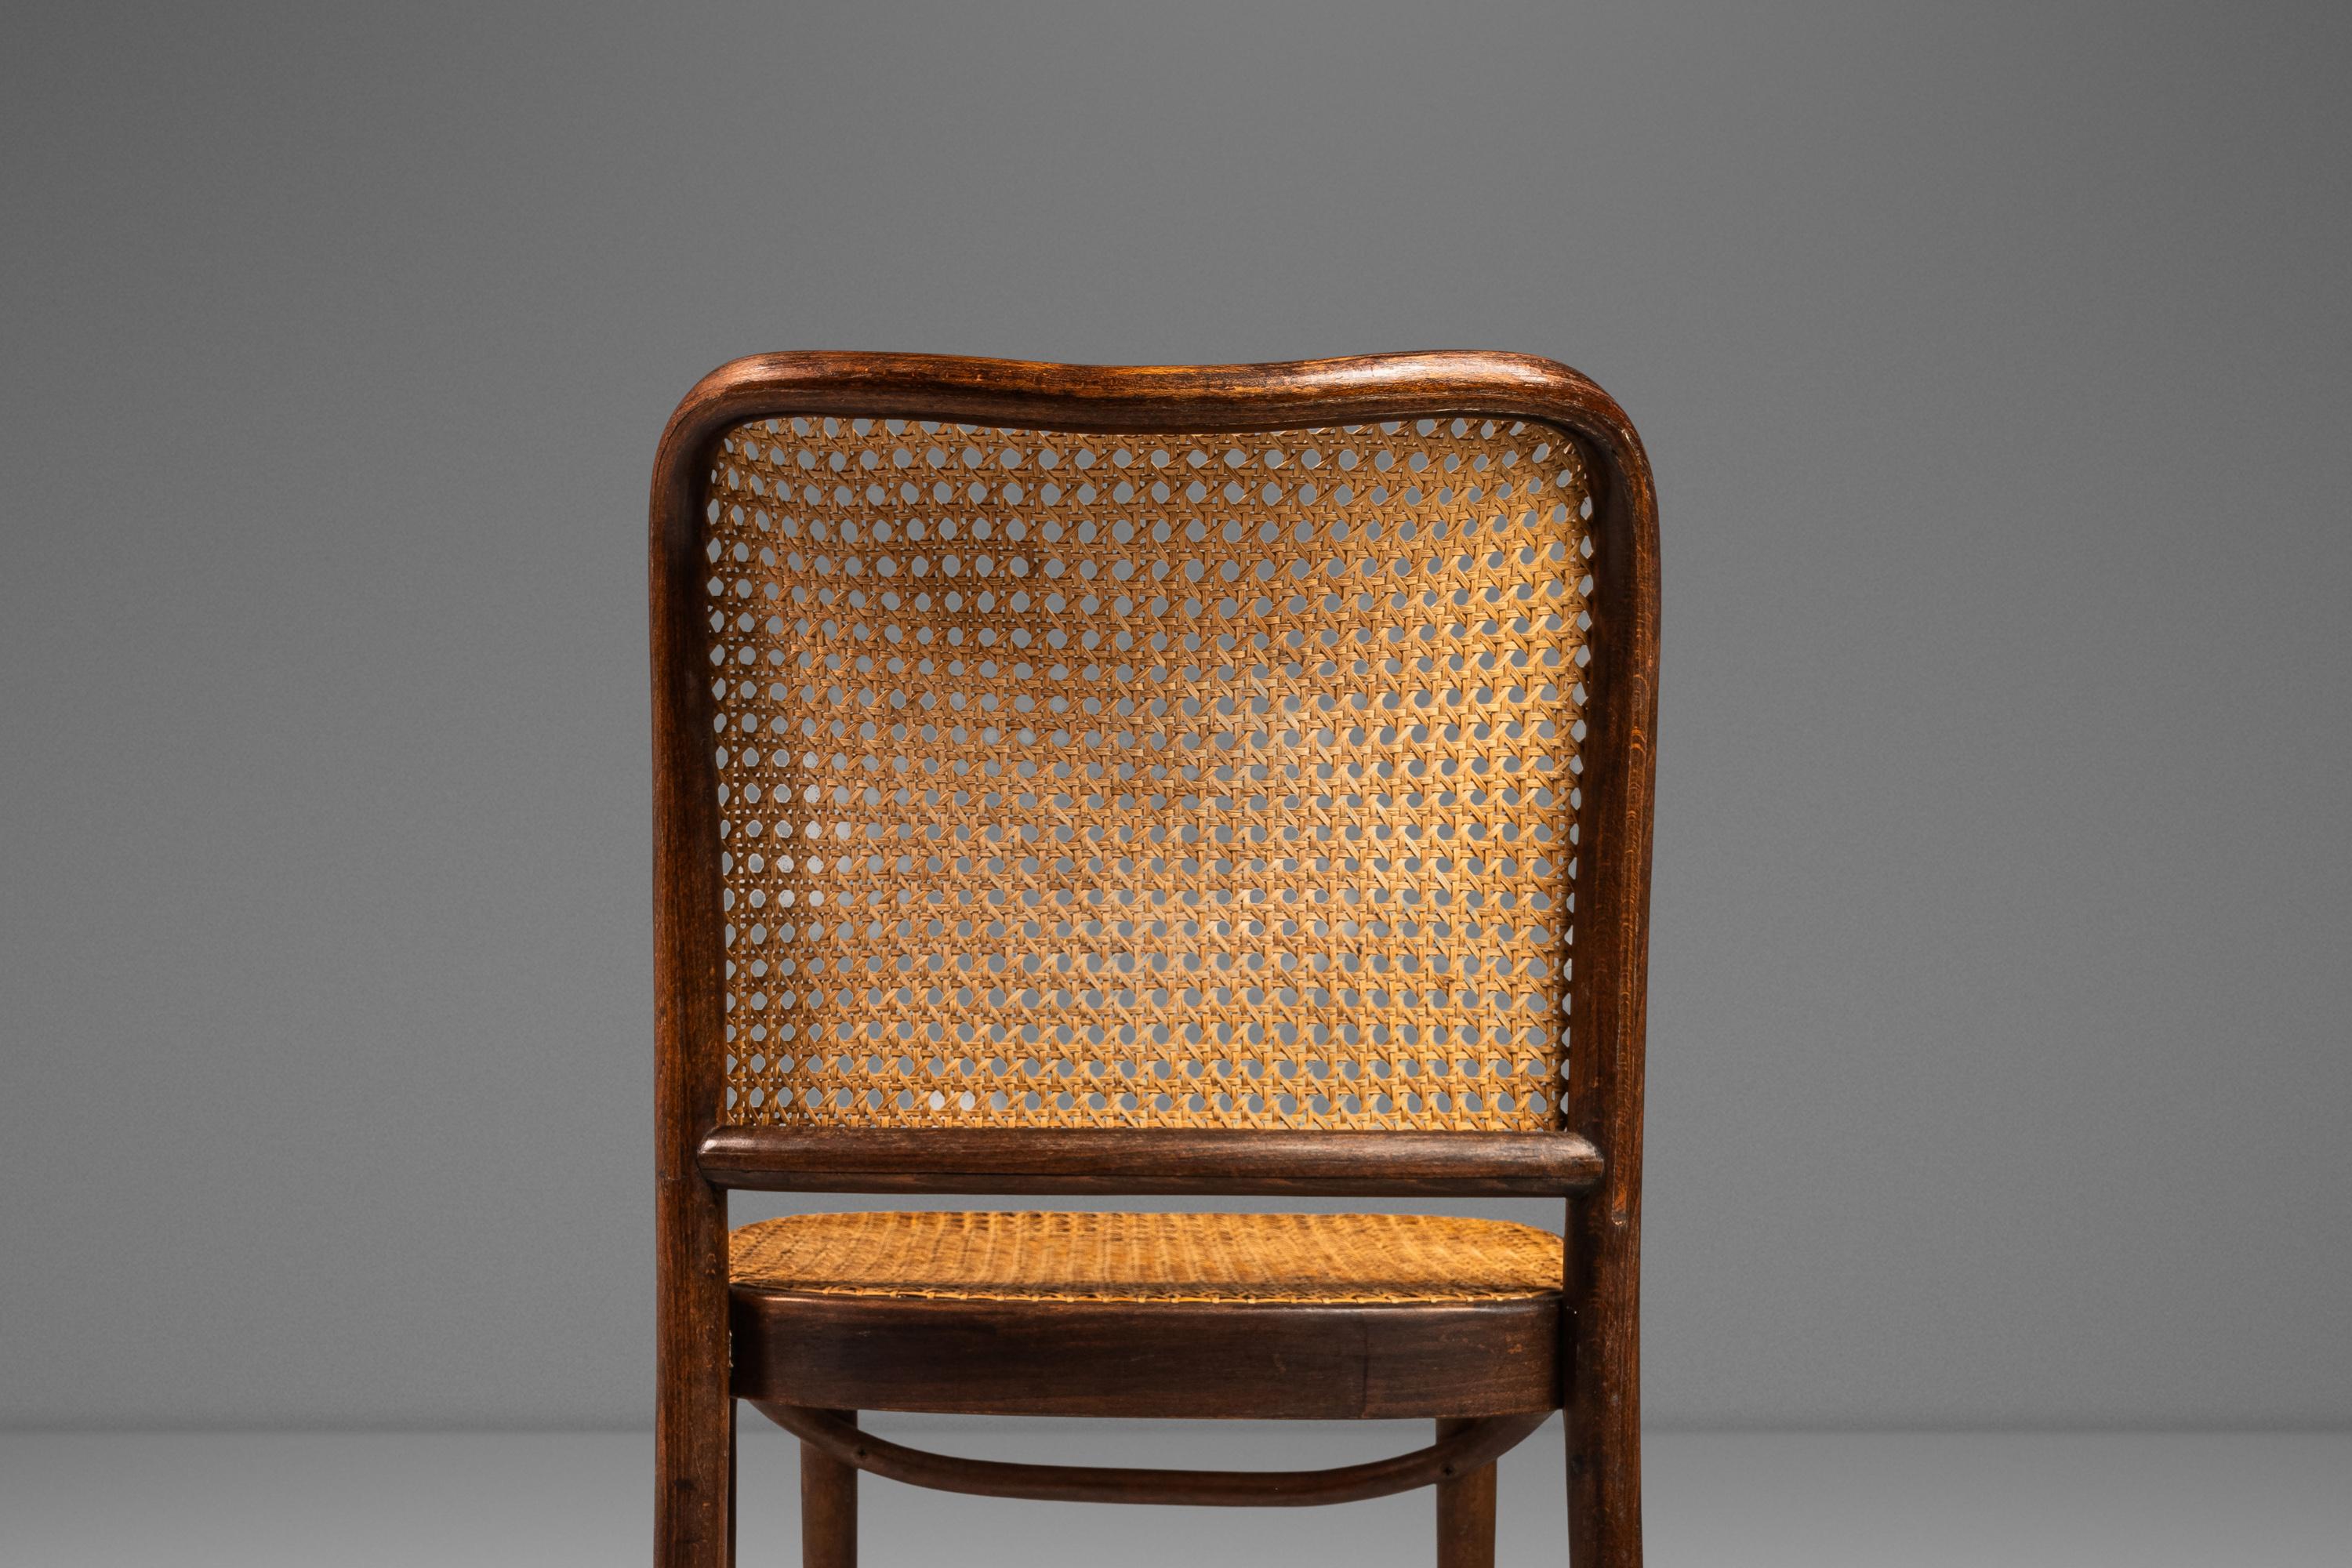 Bentwood Prague Model 811 Chair in Walnut by Josef Frank, Poland, c. 1960s For Sale 2